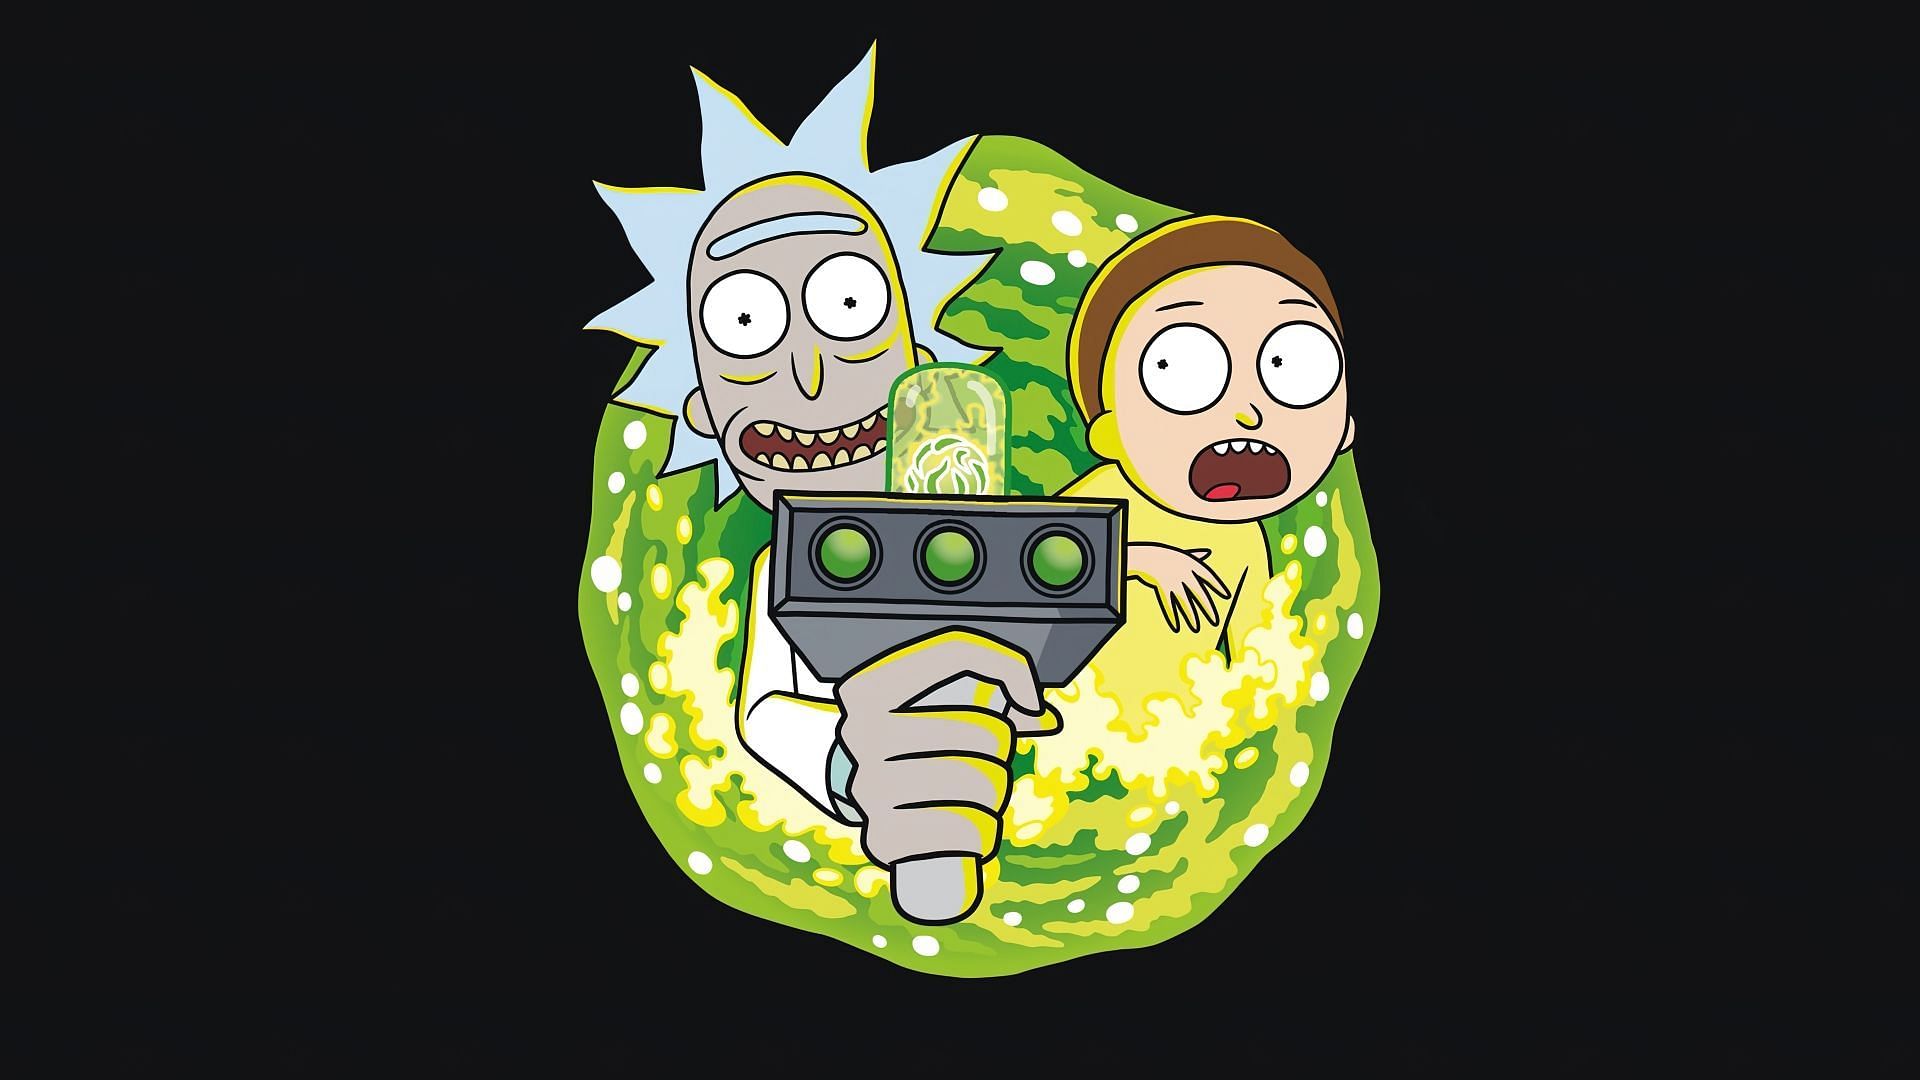 Rick And Morty Season 7 Release Date & Everything We Know 